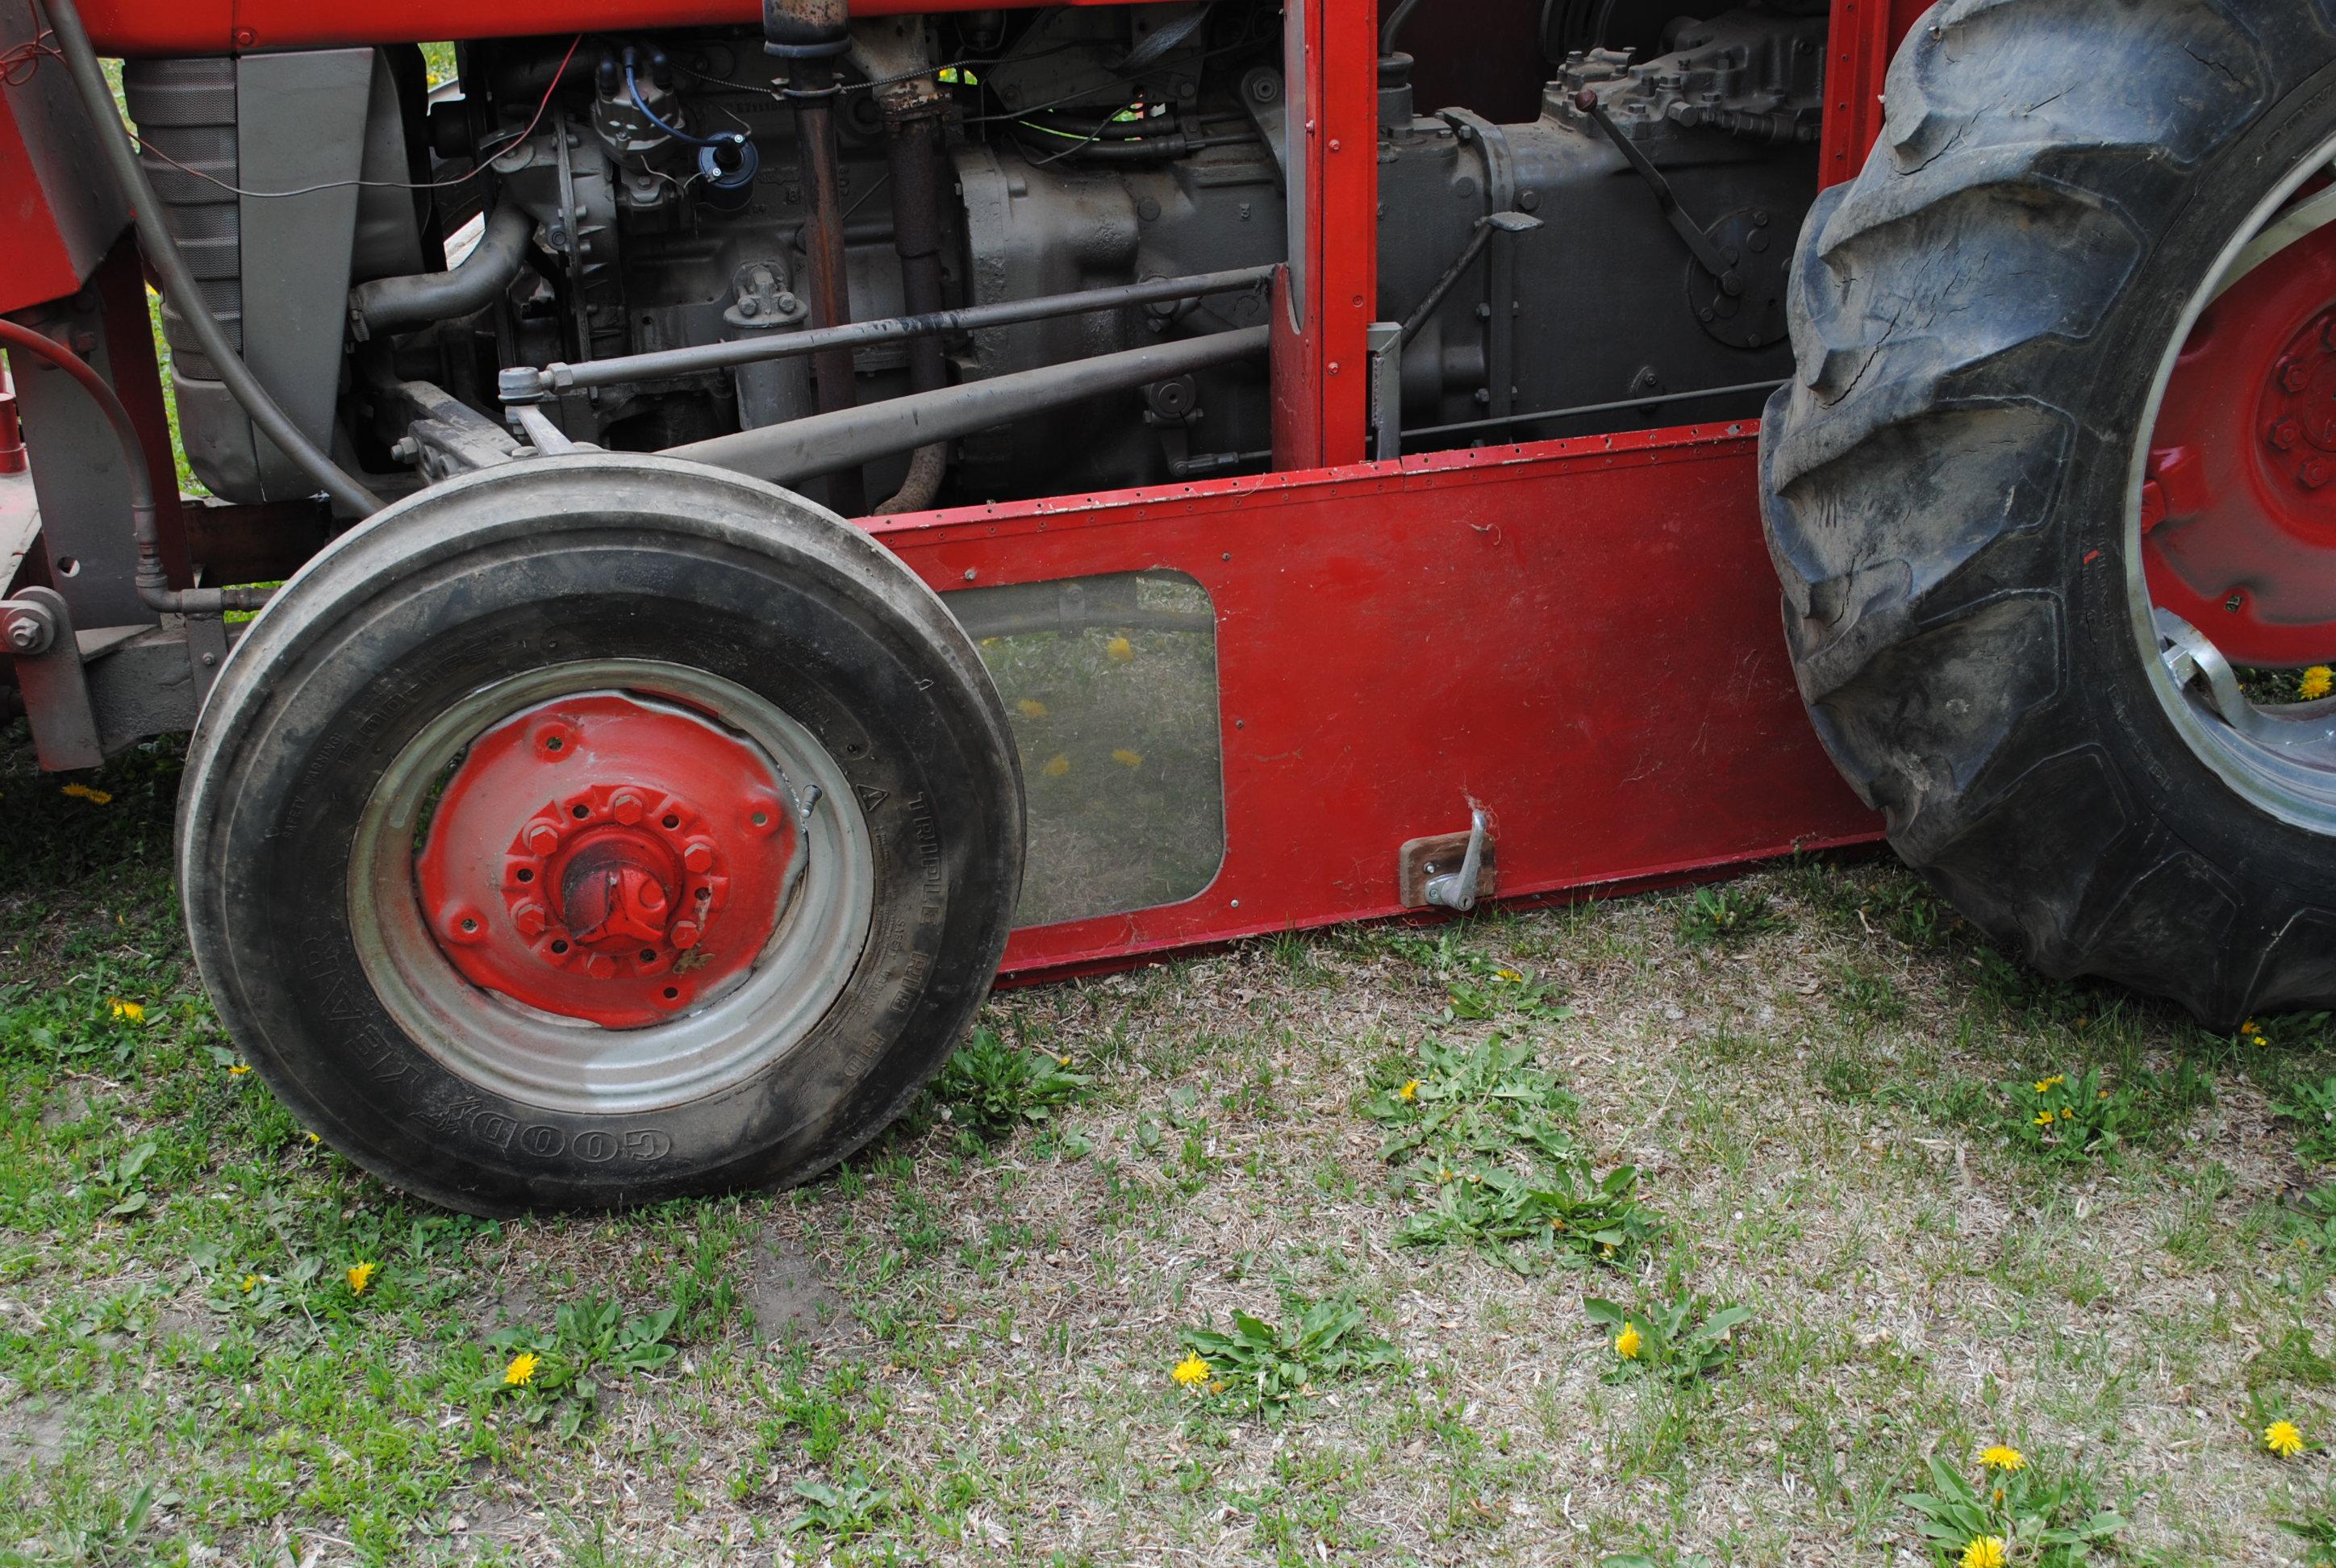 Massey Ferguson 135 Tractor with 6' hydraulic up and down front-mount broom, power steering, shows 2